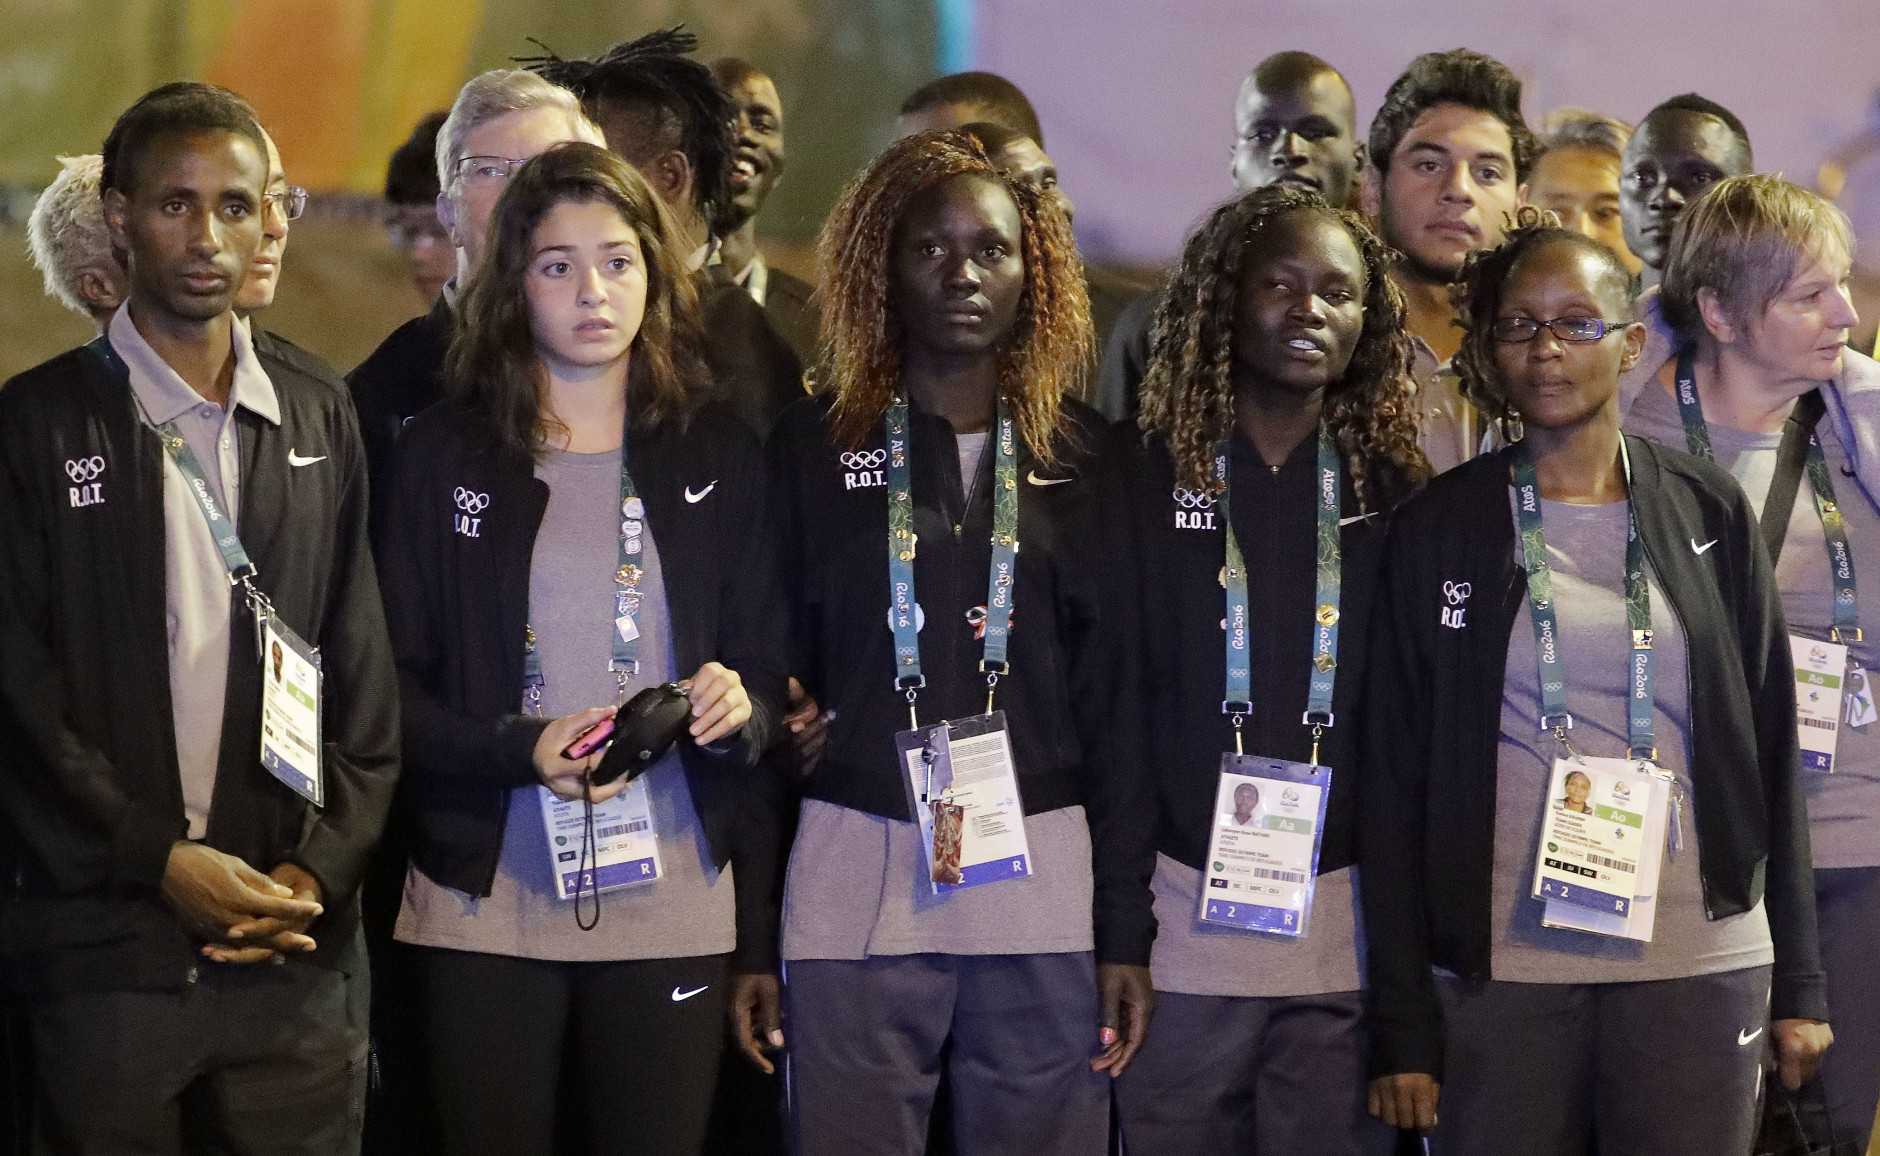 Members of the Refugee Olympic Team watch a performance during a welcome ceremony at the Olympic athletes village in Rio de Janeiro, Brazil, Wednesday, Aug. 3, 2016. The Summer 2016 Olympics is scheduled to open Aug. 5. (AP Photo/Charlie Riedel)